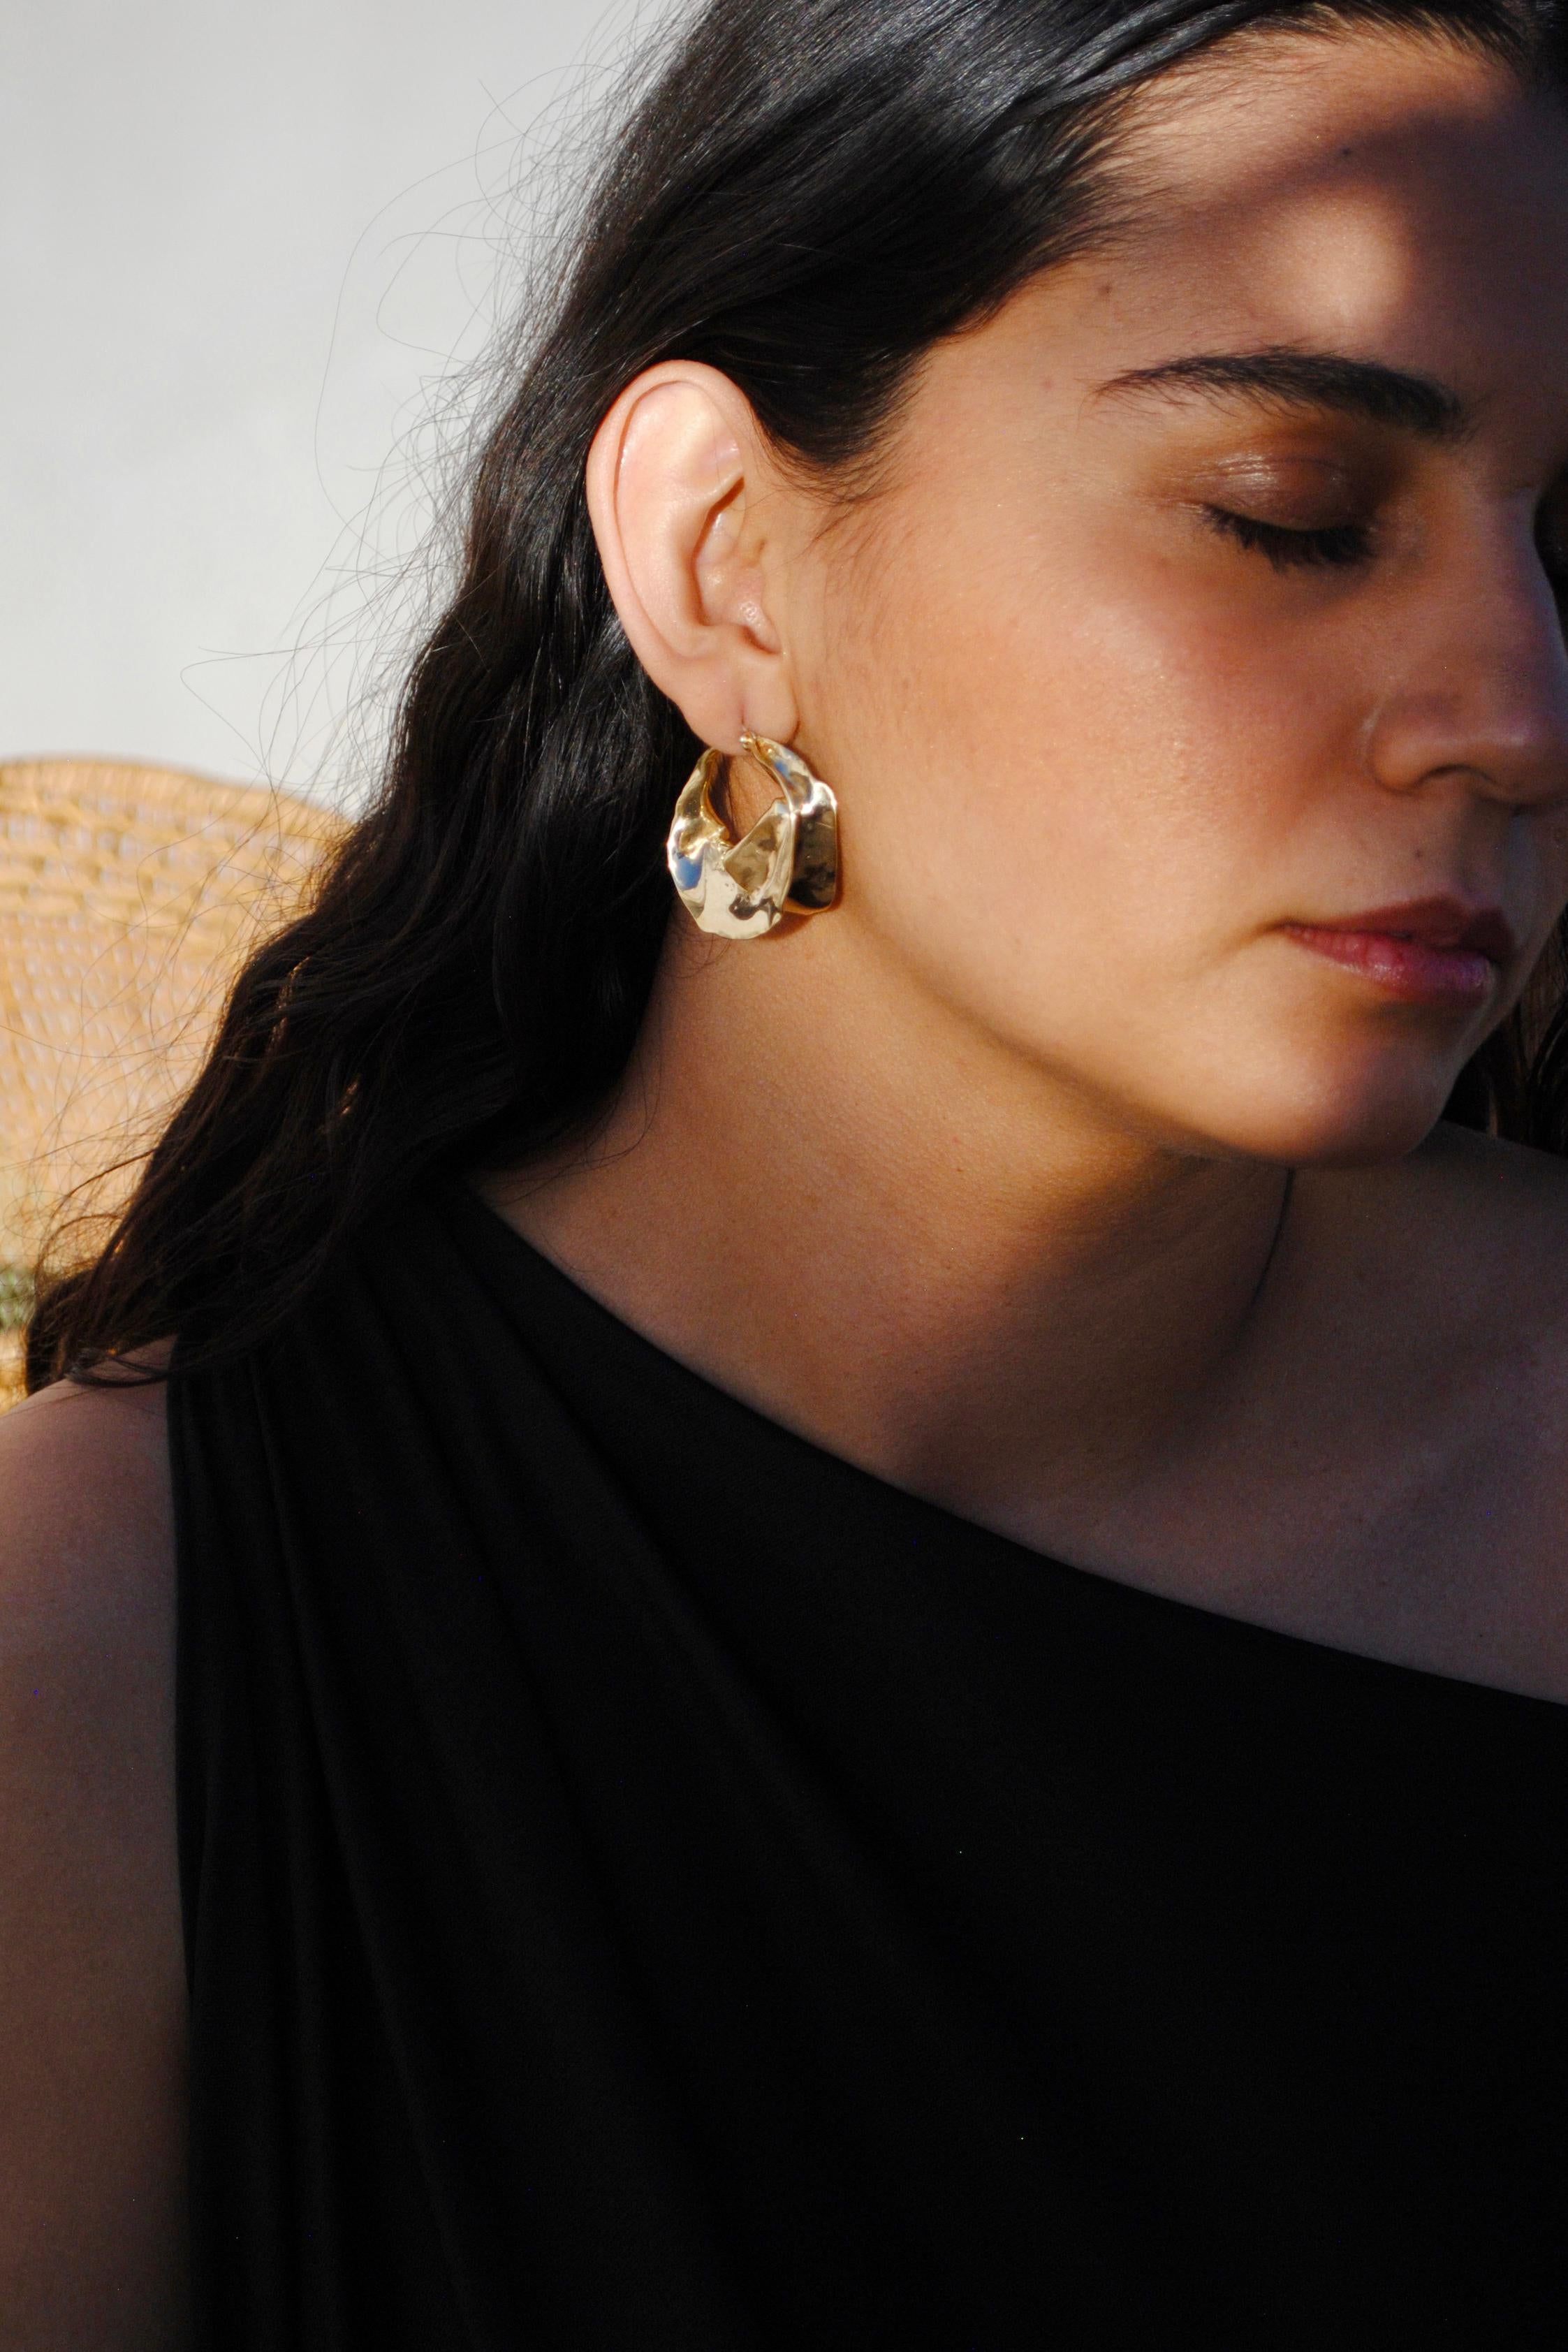 Our best-selling earring is inspired by the gold jewelry of the Fulani tribe's women of North Africa and the blooming flowers of Georgia O'Keeffe’s painting. The Georgia Earrings are an easy and elevated hoop for every day and the perfect traveling